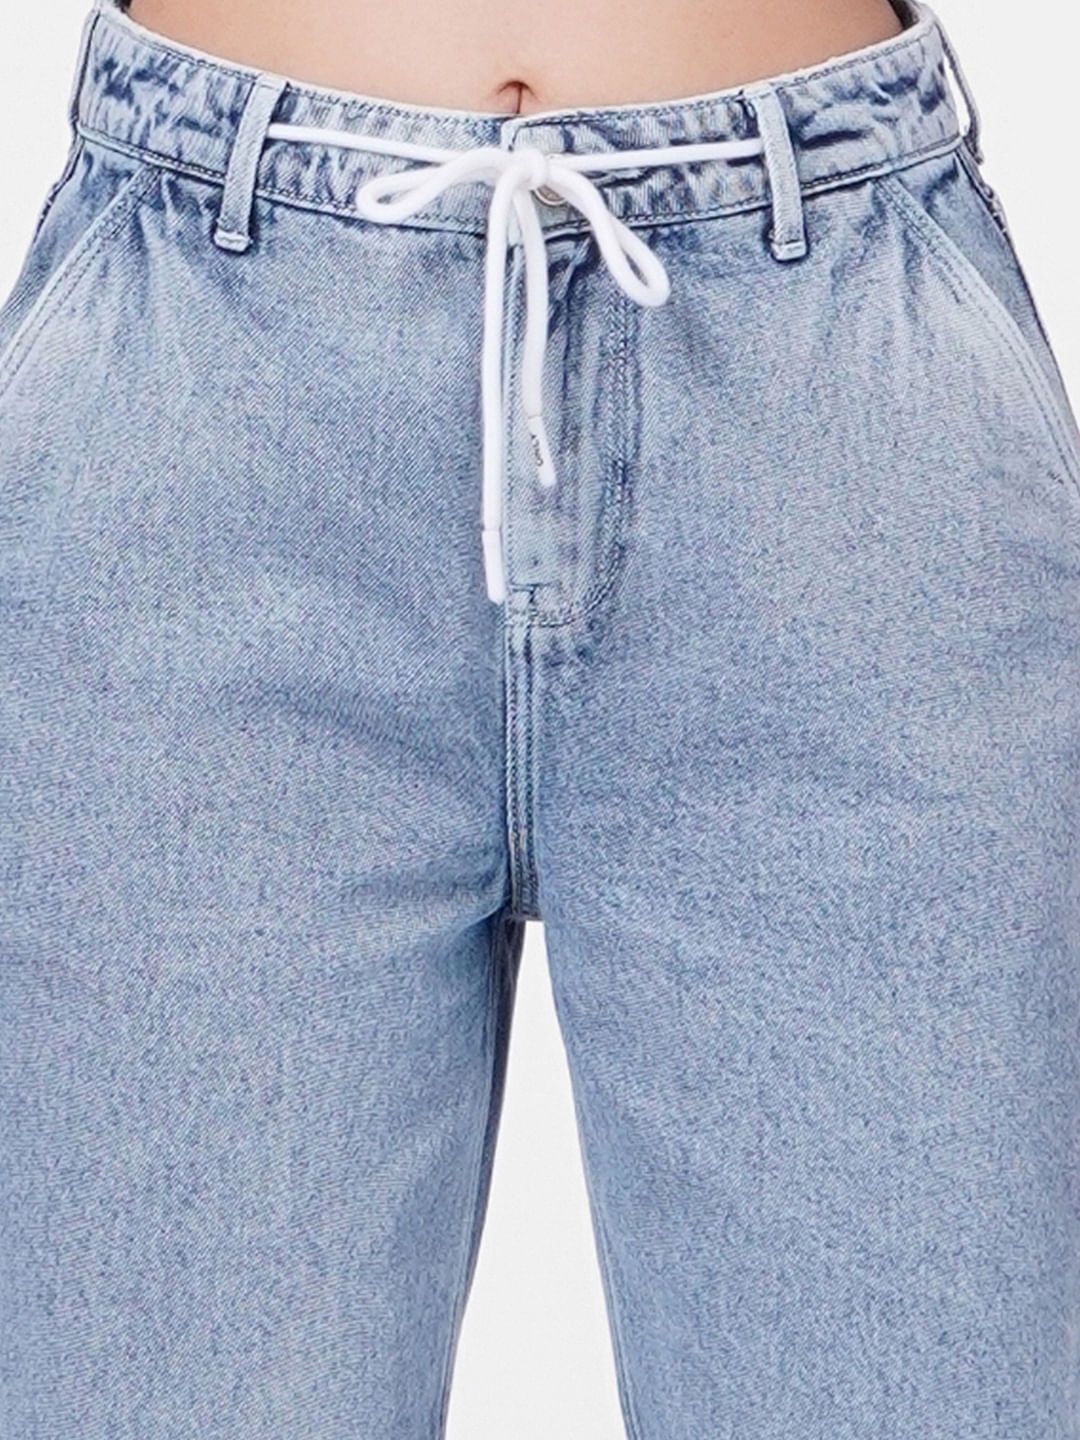 Blue Contrast Stitched Double Panel Jeans  Buy Baggy Jeans  Fugazee   FUGAZEE